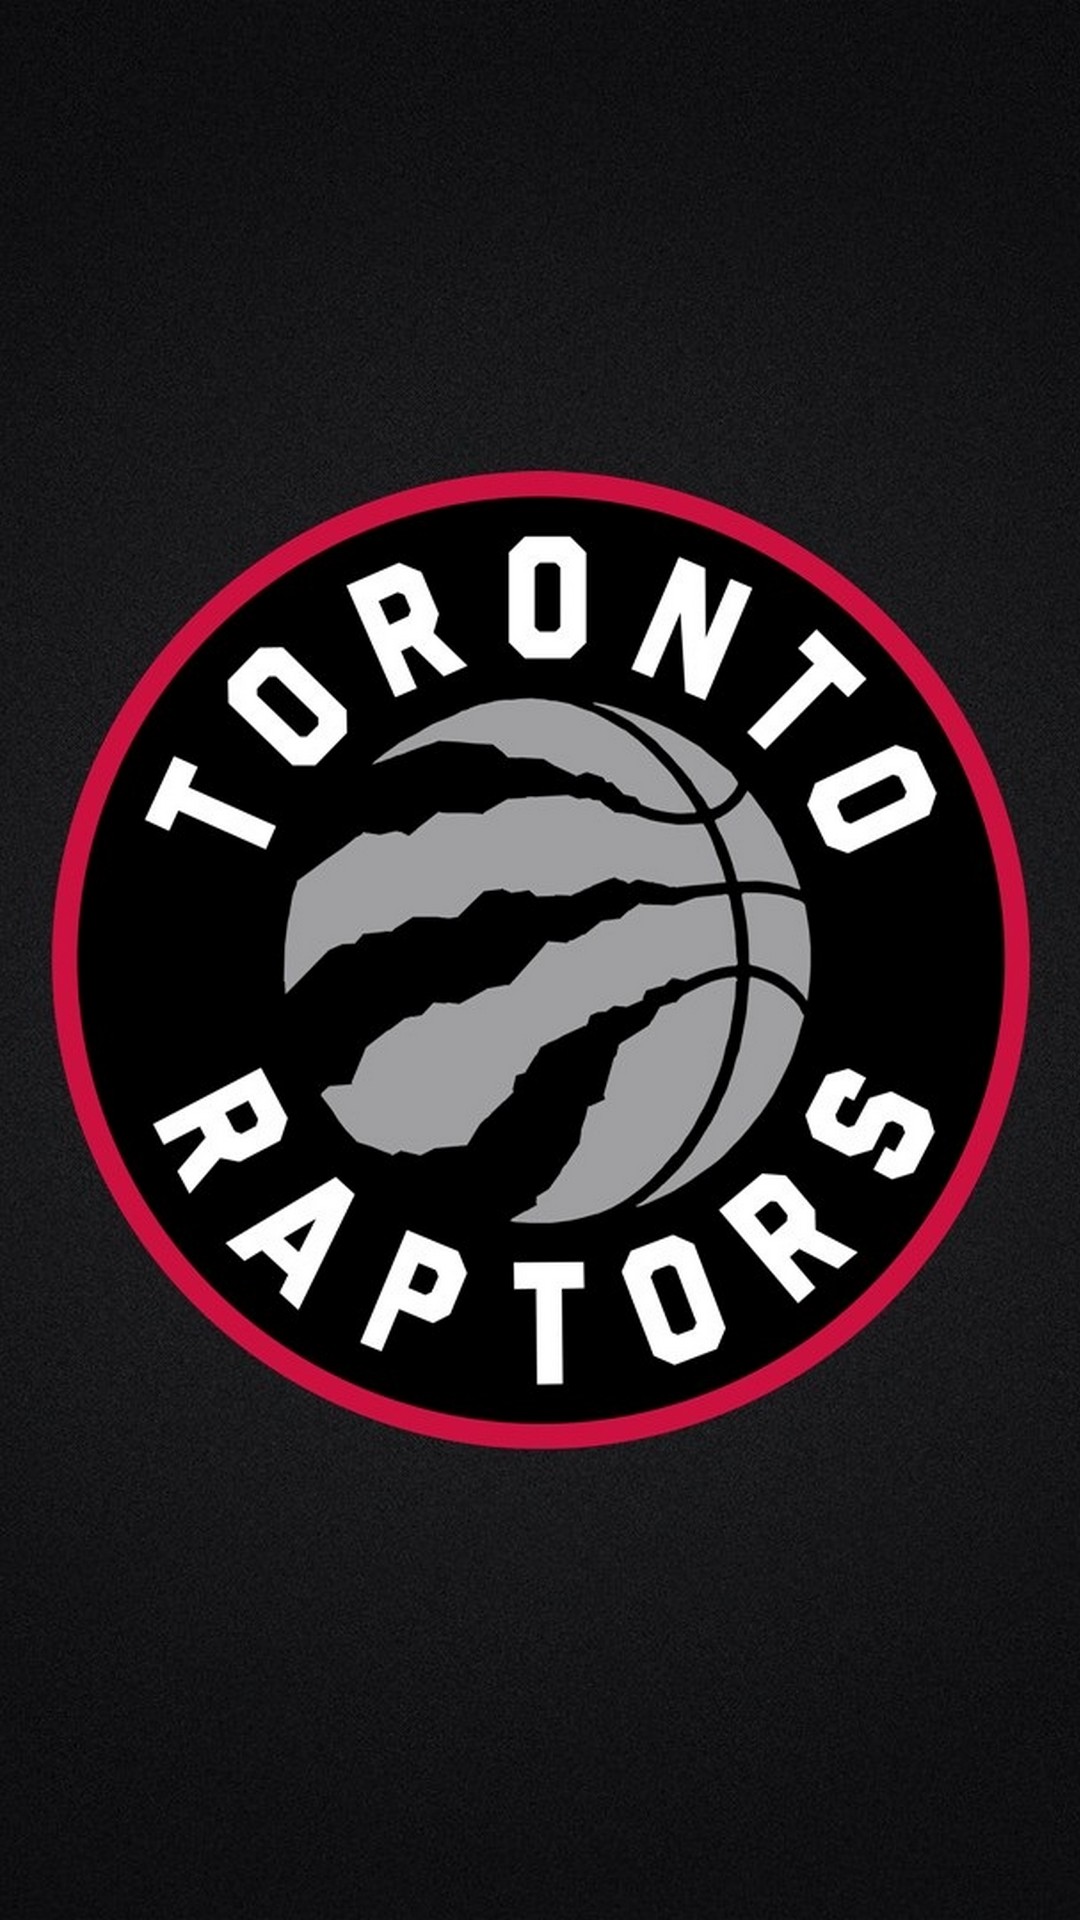 Android Wallpaper Toronto Raptors with image resolution 1080x1920 pixel. You can make this wallpaper for your Android backgrounds, Tablet, Smartphones Screensavers and Mobile Phone Lock Screen